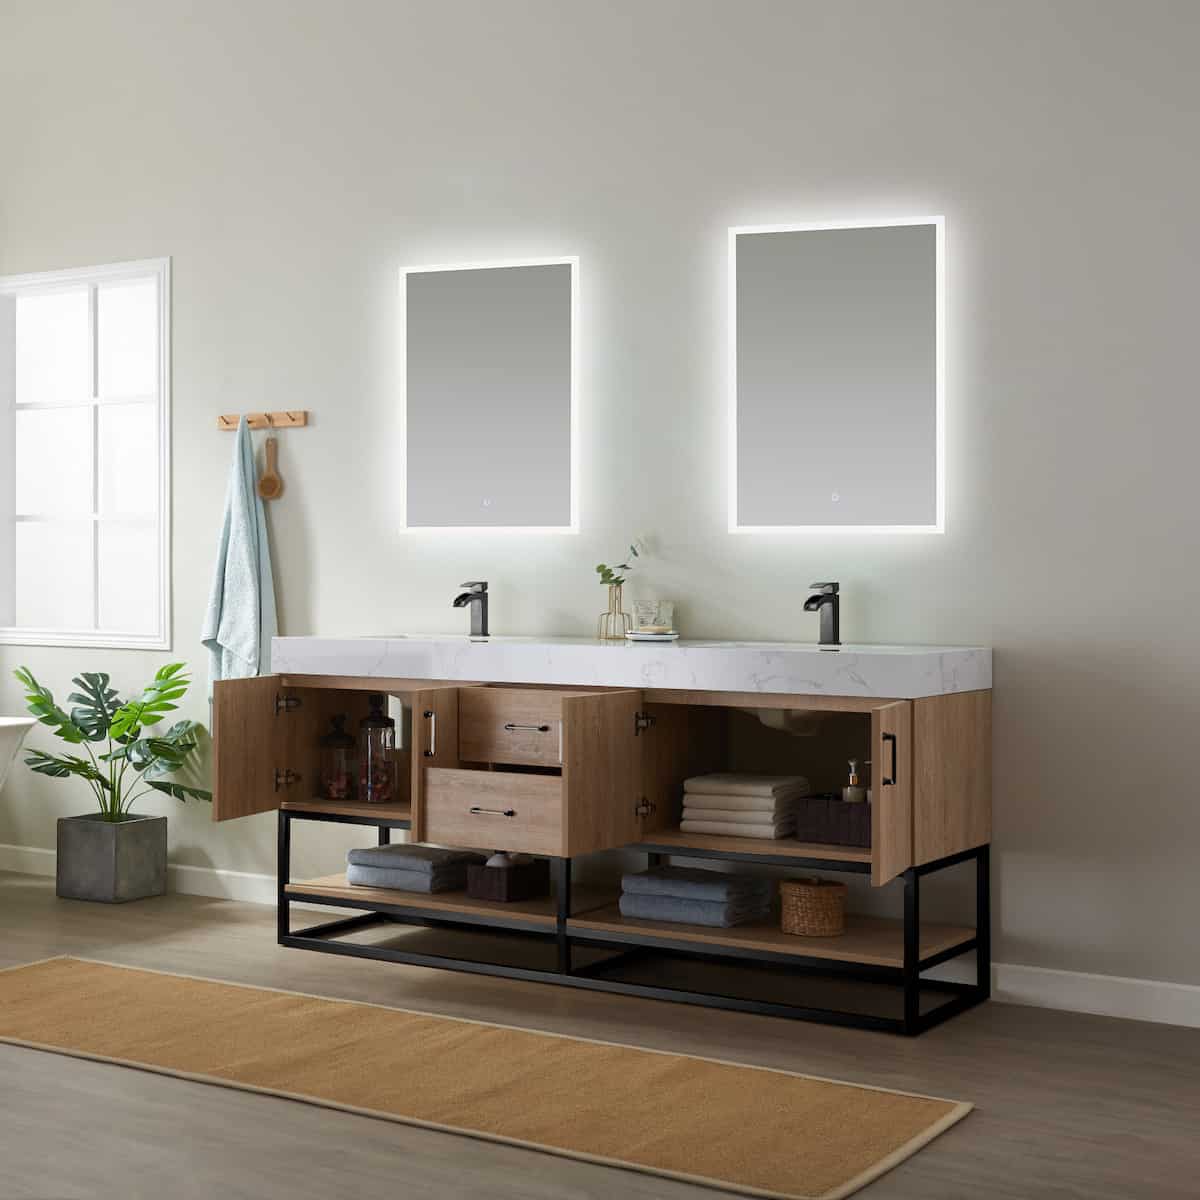 Vinnova Alistair 72 Inch Freestanding Double Vanity in North American Oak and Matte Black Frame with White Grain Stone Countertop With Mirrors Inside 789072B-NO-GW